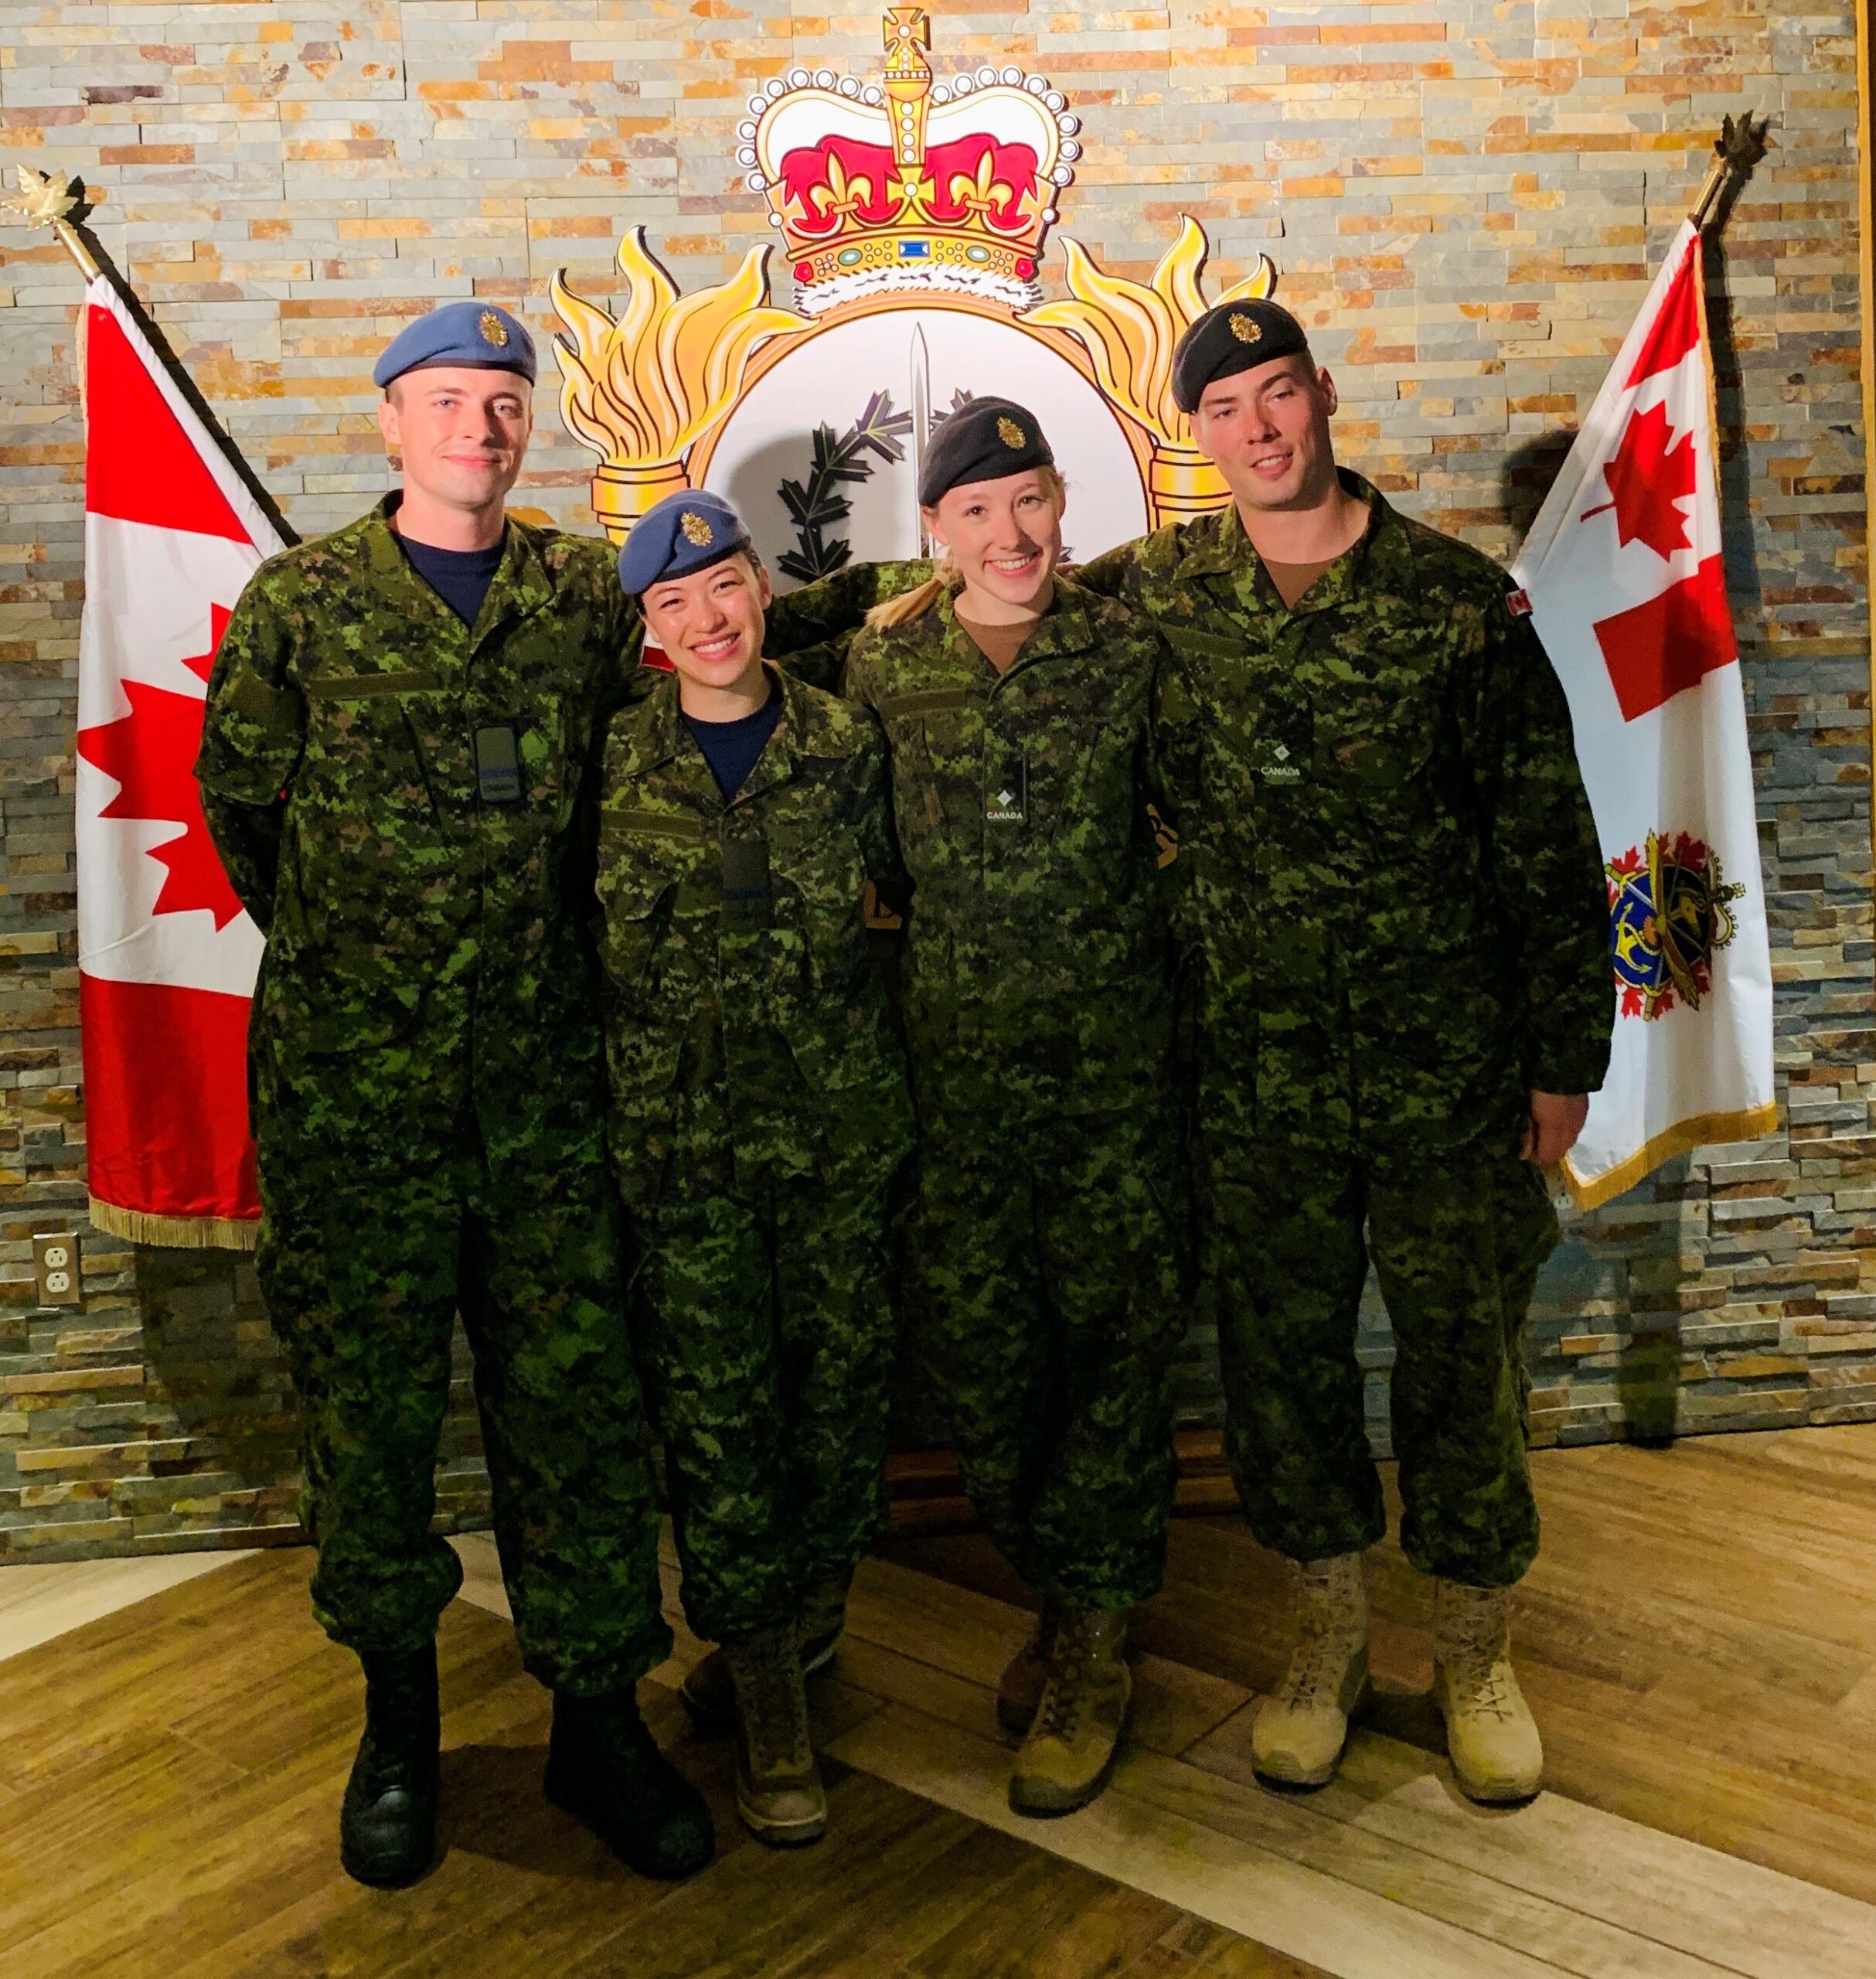 Current MOTP together at summer training 2019 including, from left to right, 2Lt Michael Crozier, 2Lt Phoebe Bruce, 2Lt Takara Martin, and 2Lt Bryce Knapp.